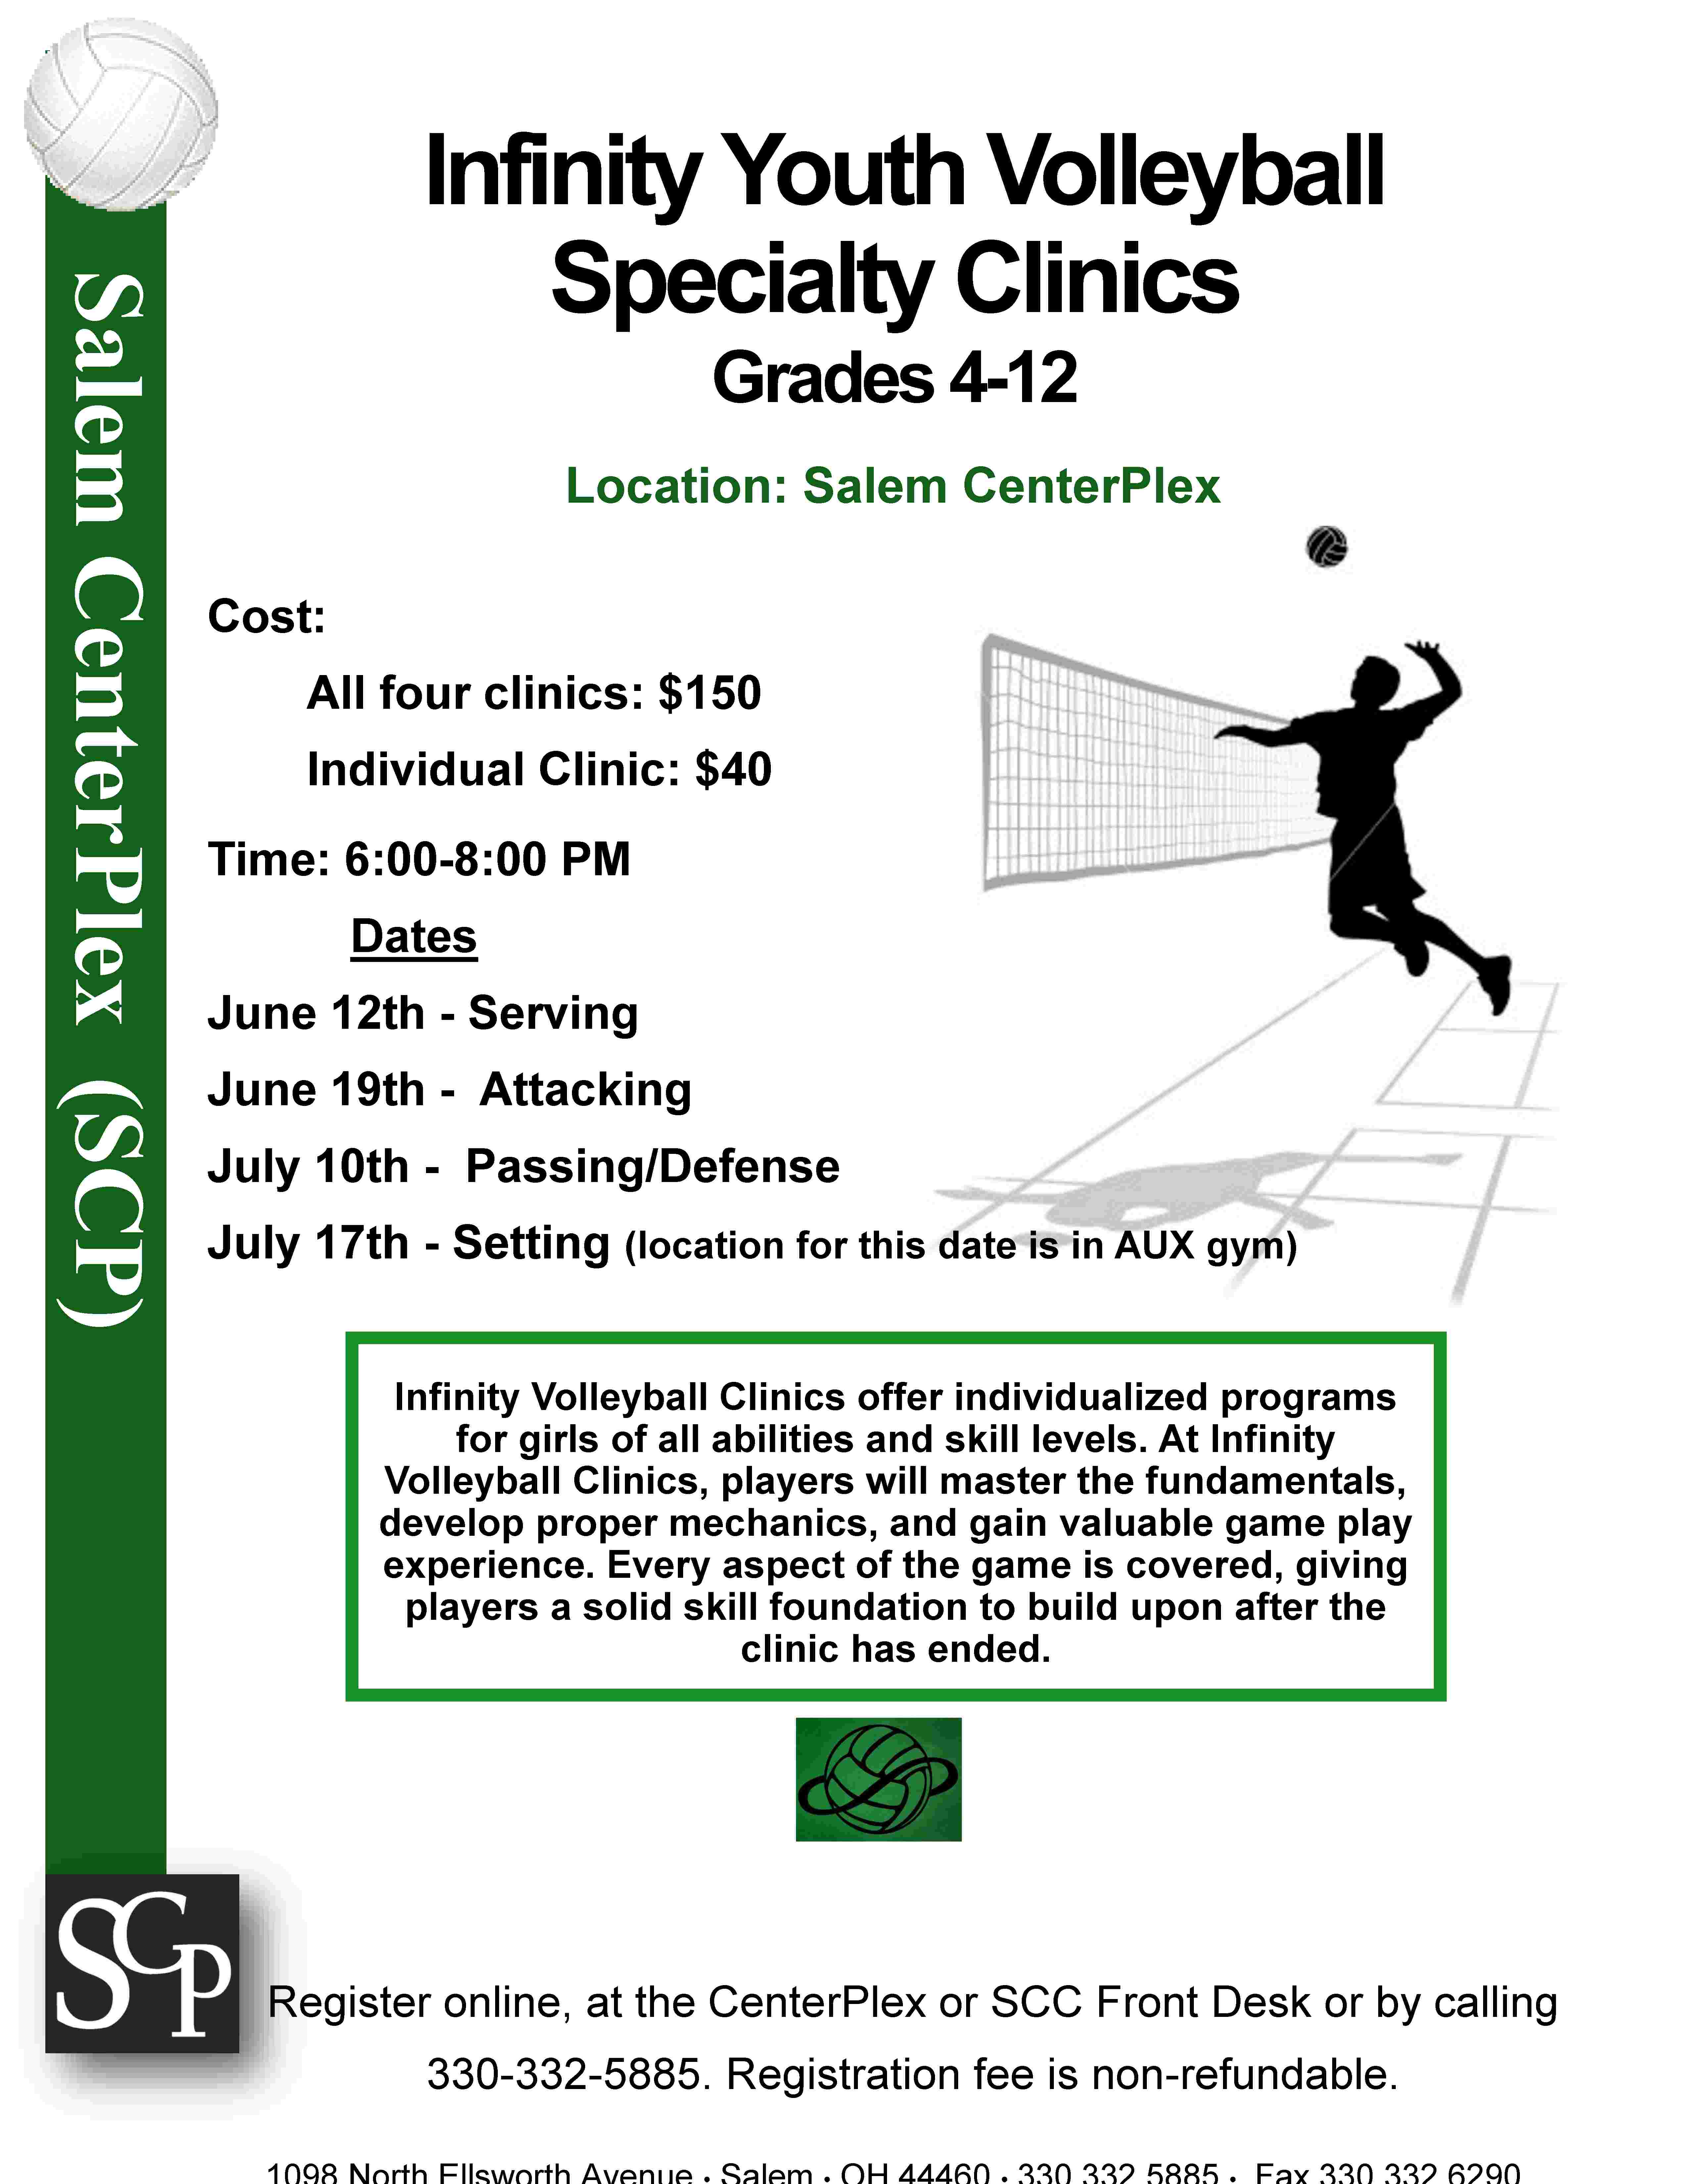 Infinity Youth Volleyball Specialty Clinics Updated 7.17 date 001